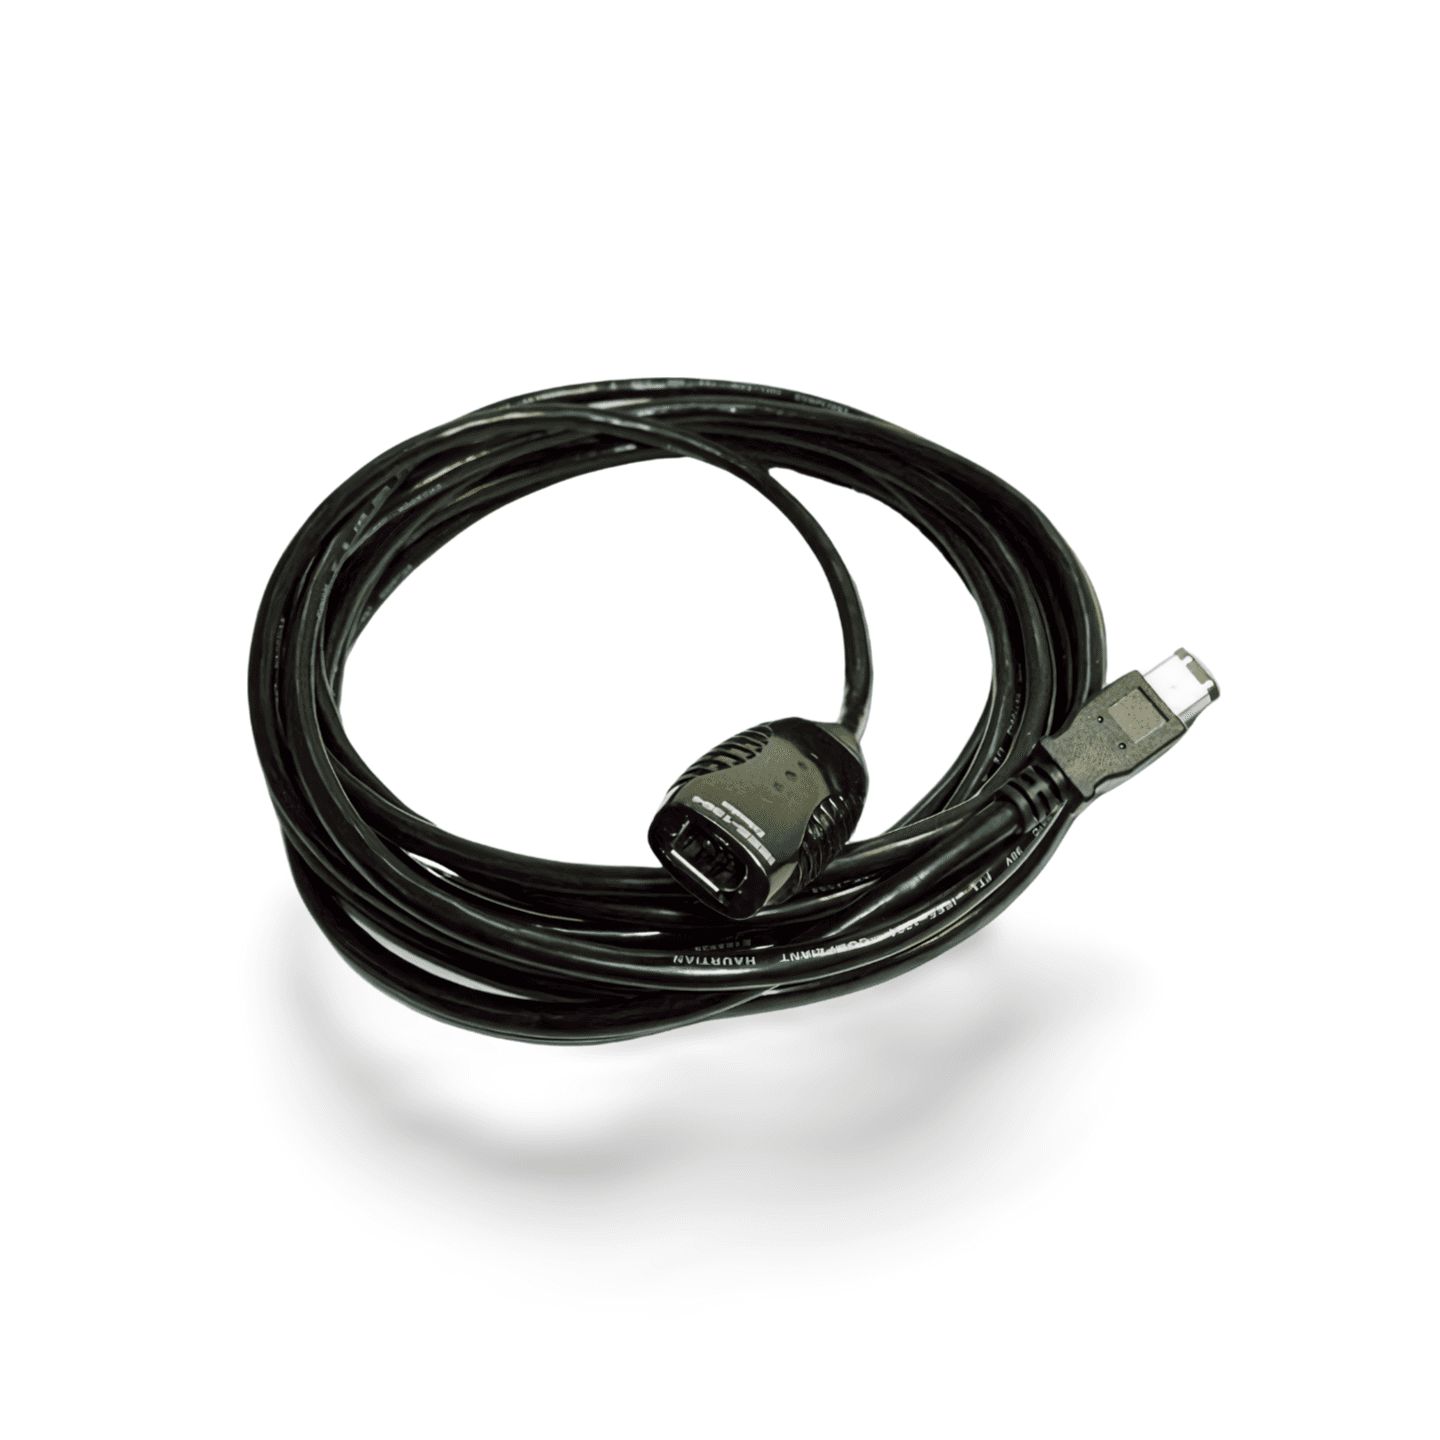 16 5ft USB Cable Type A Male to Type A Male Cable black